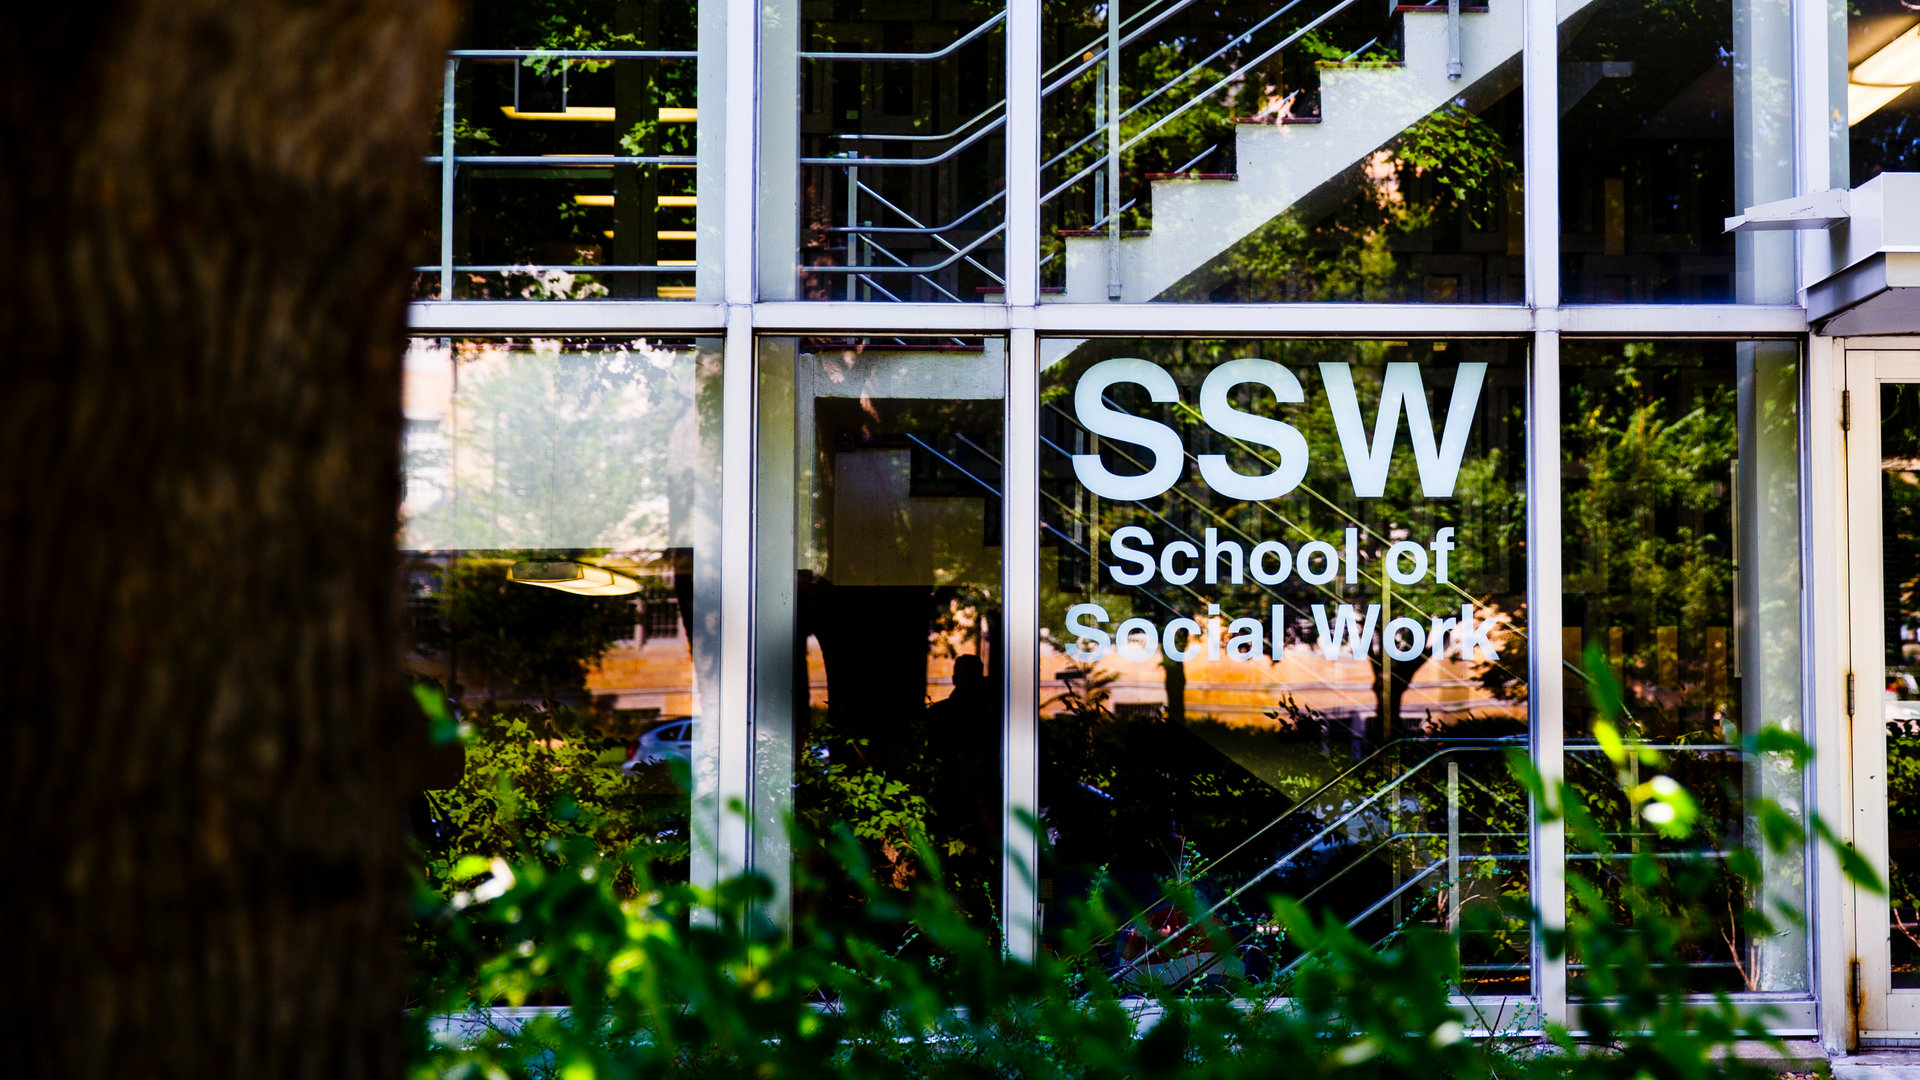 Exterior of the Summit Classroom Building, which houses the School of Social Work